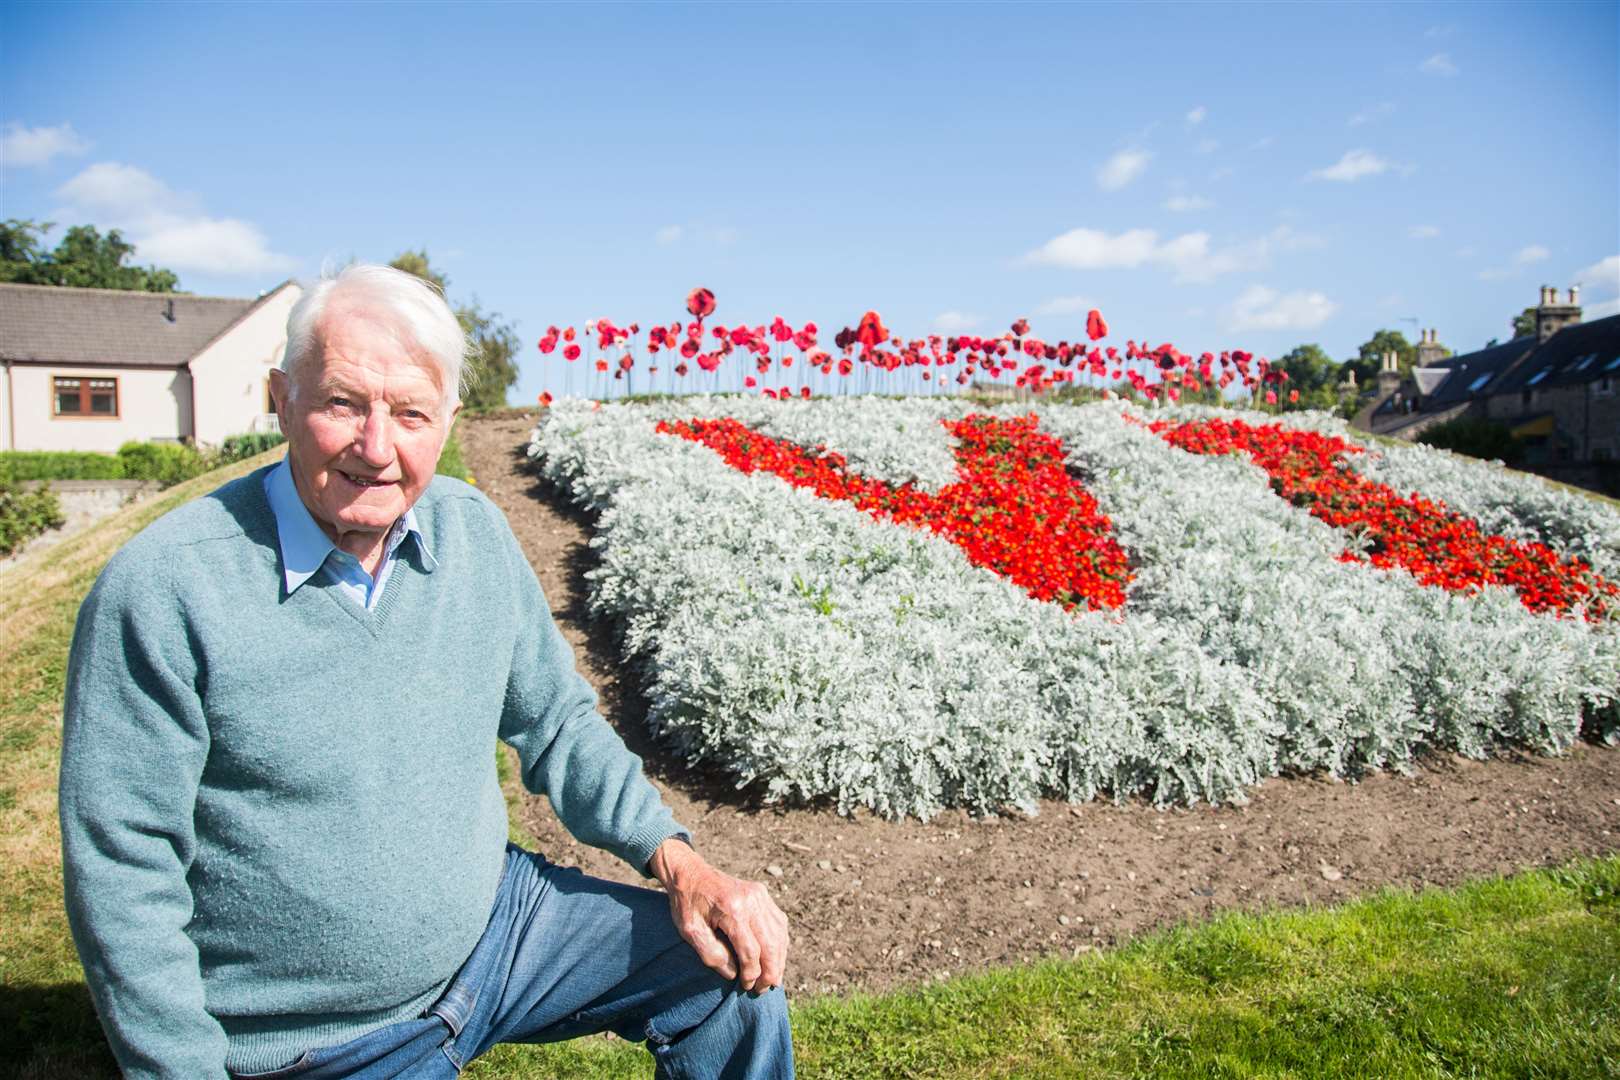 The memorial flower bed Bob created at Market Green.